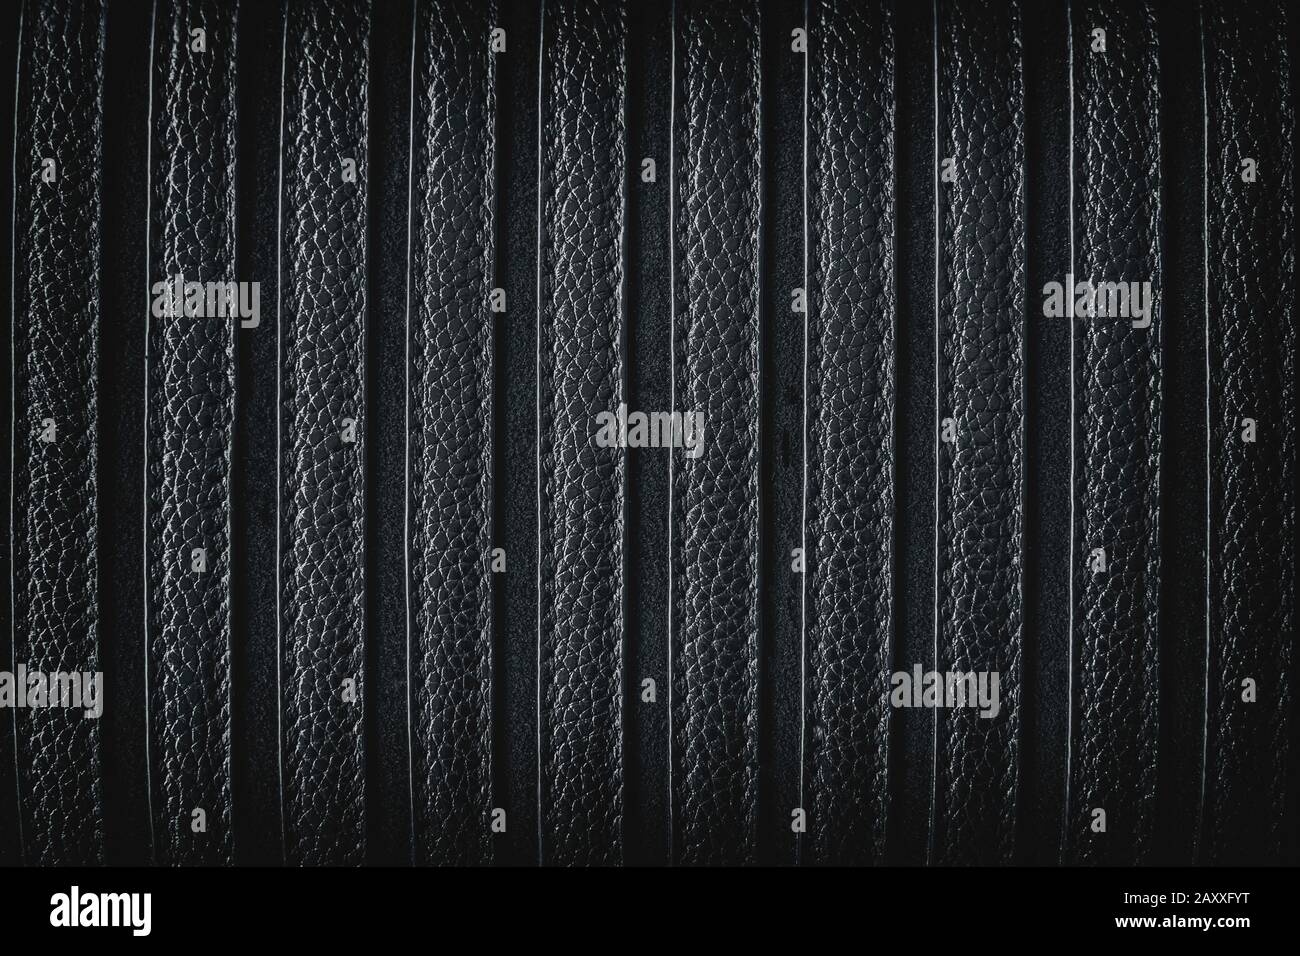 Black Suede Texture High Resolution Stock Photography and Images - Alamy